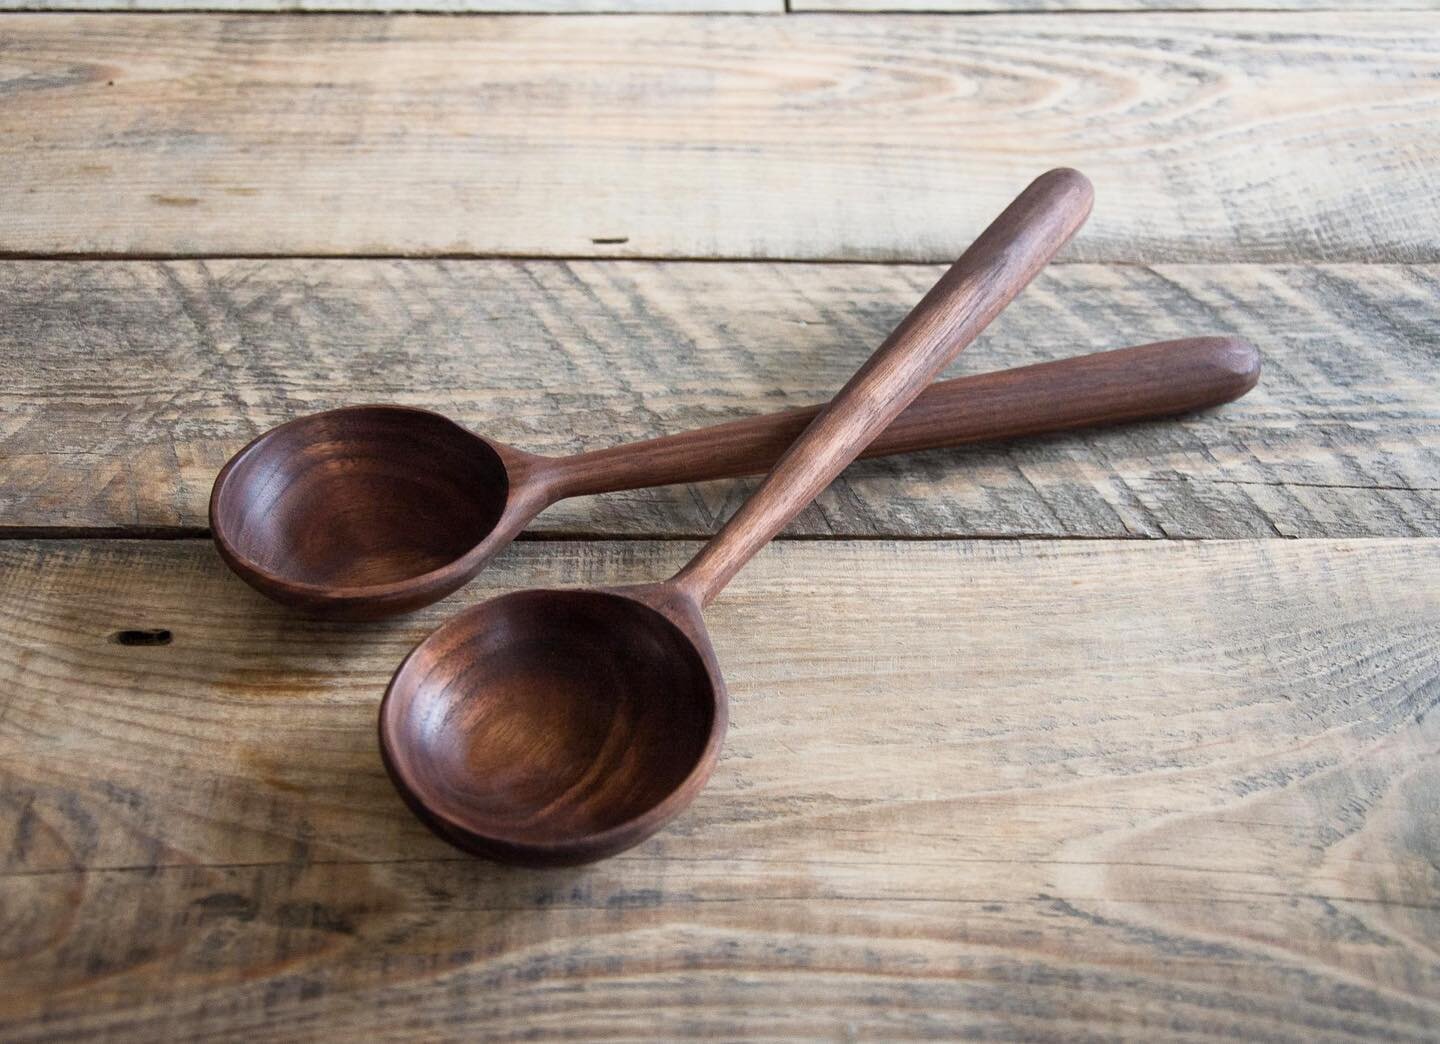 Was approved for my Instagram store earlier this week &amp; have slowly been adding a few items. Recently added the 12&rdquo; Black Walnut Cooking Spoon so be sure to check it out! -
-
-
-
-

#woodworking #woodturning #fineart #handmade #makersmoveme